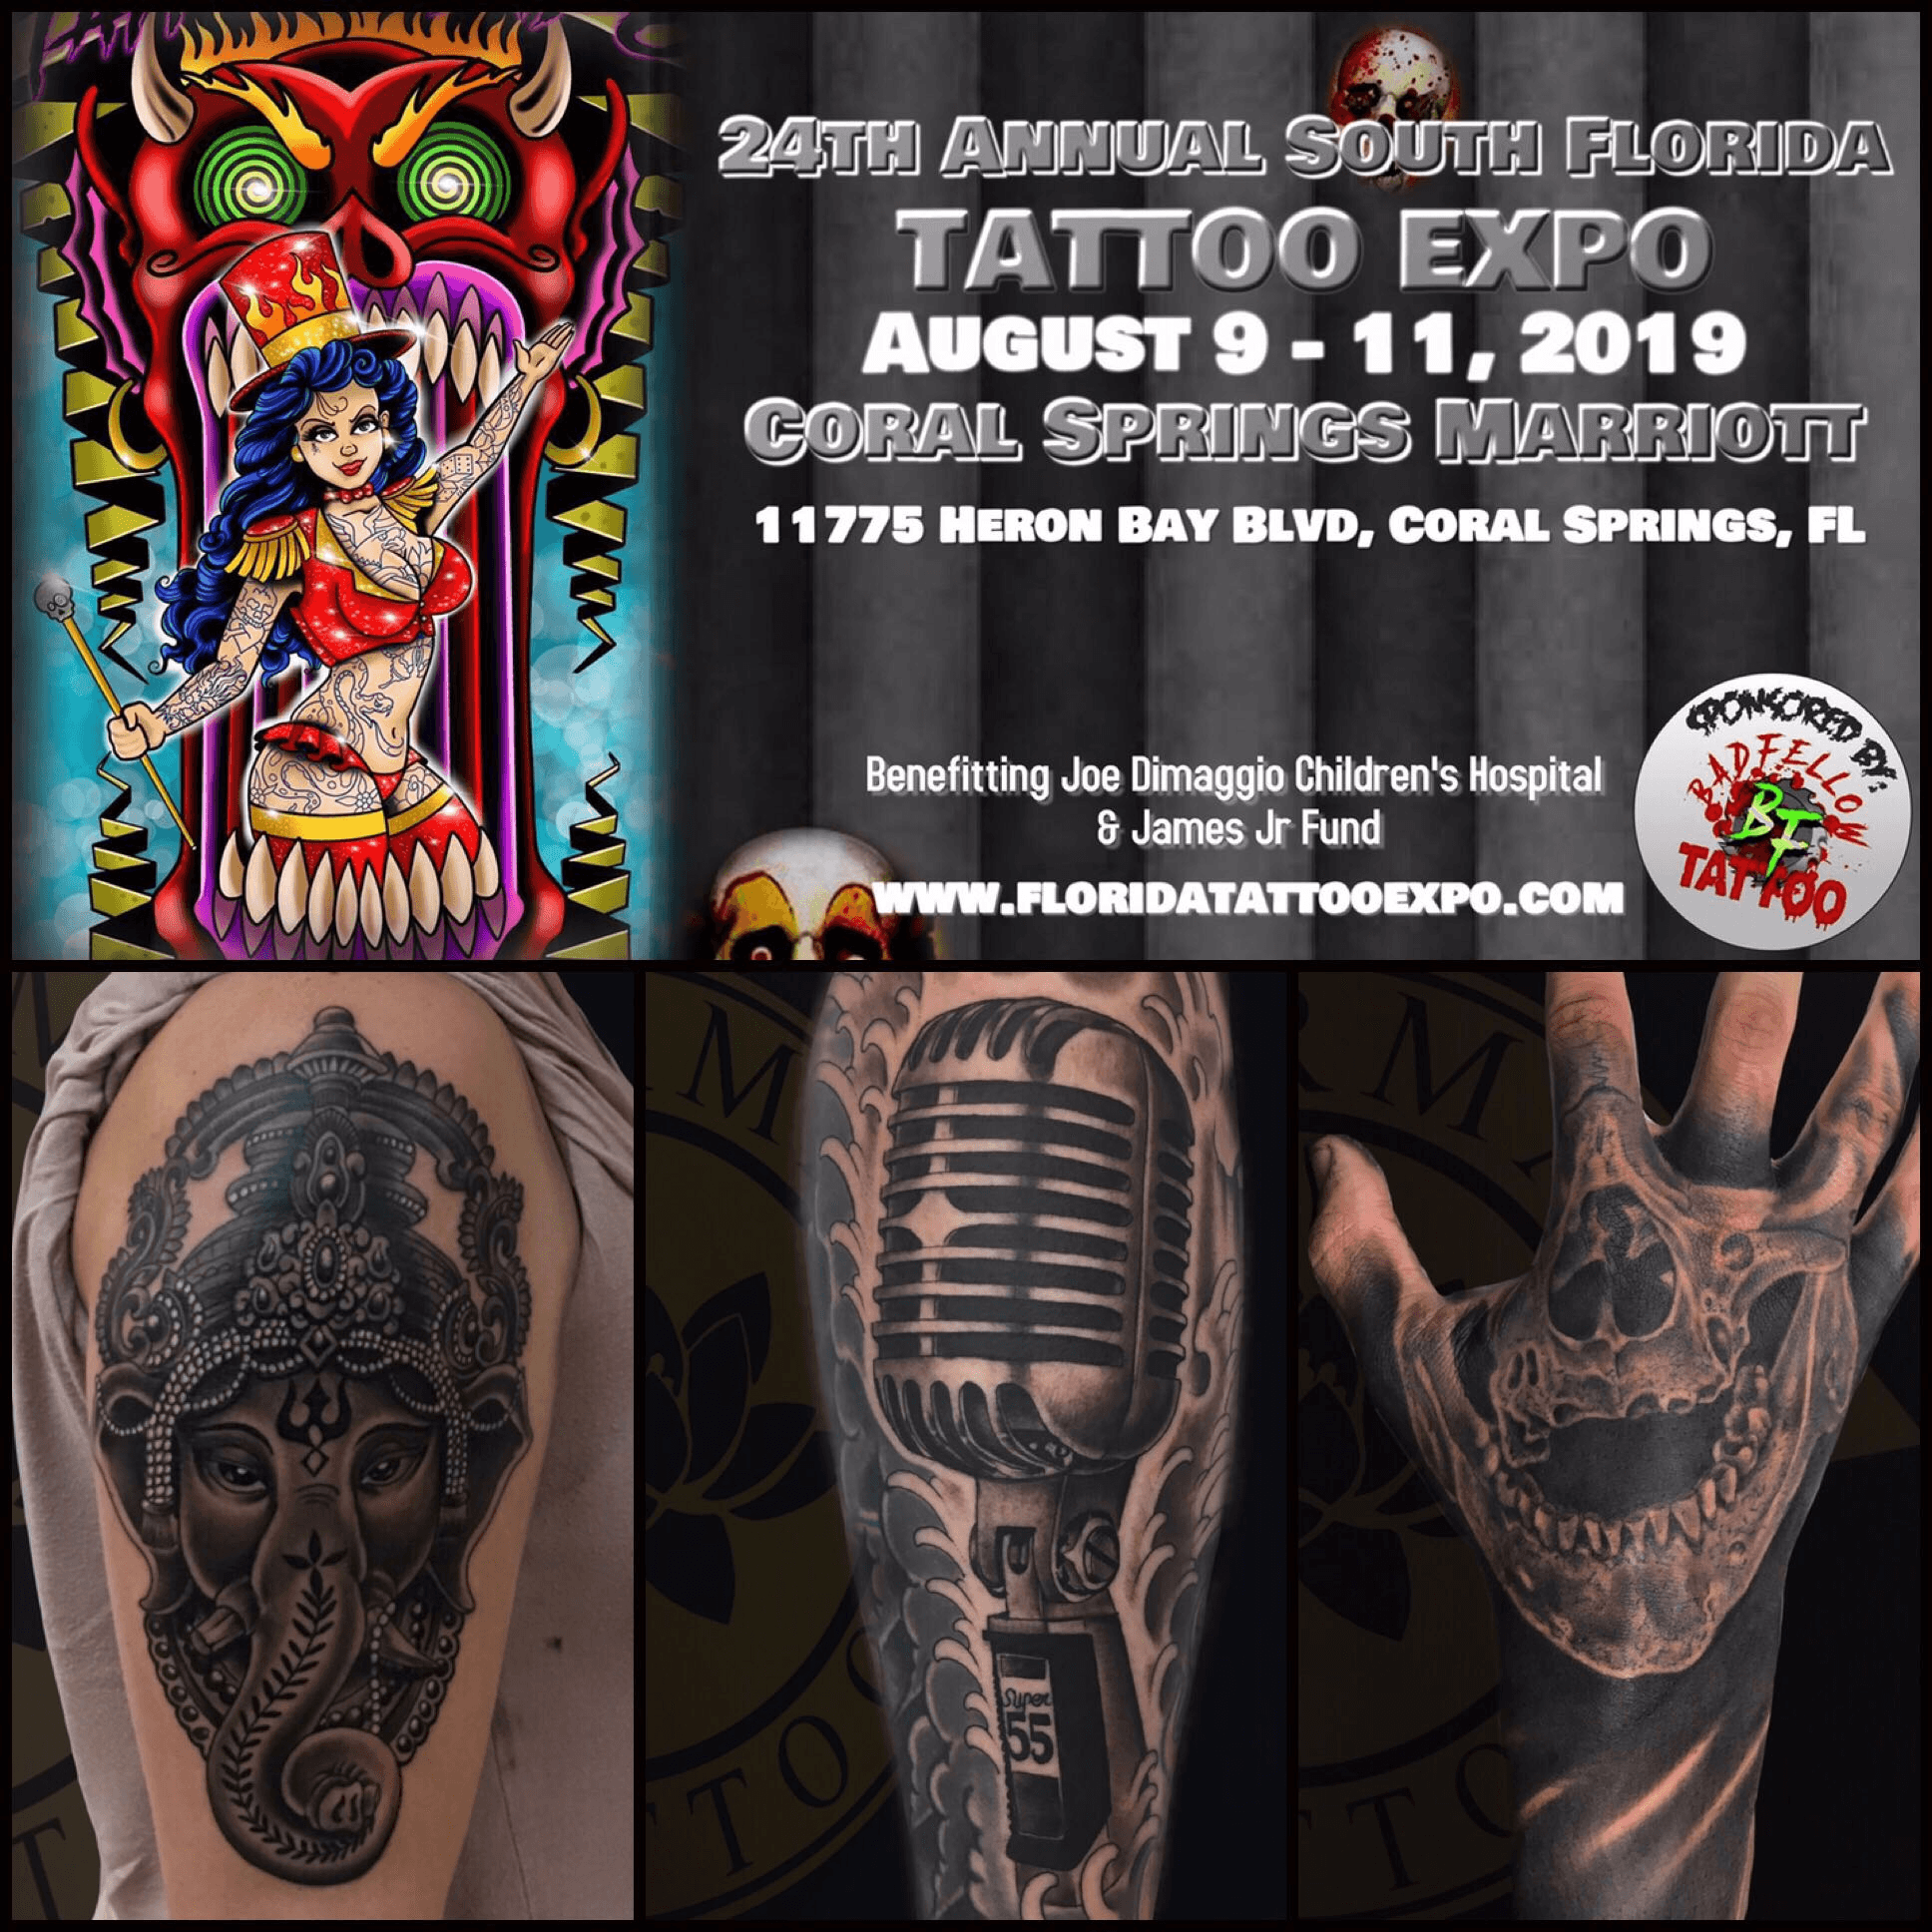 26th Annual South Florida Tattoo Expo  Fort Lauderdale FL  Facebook